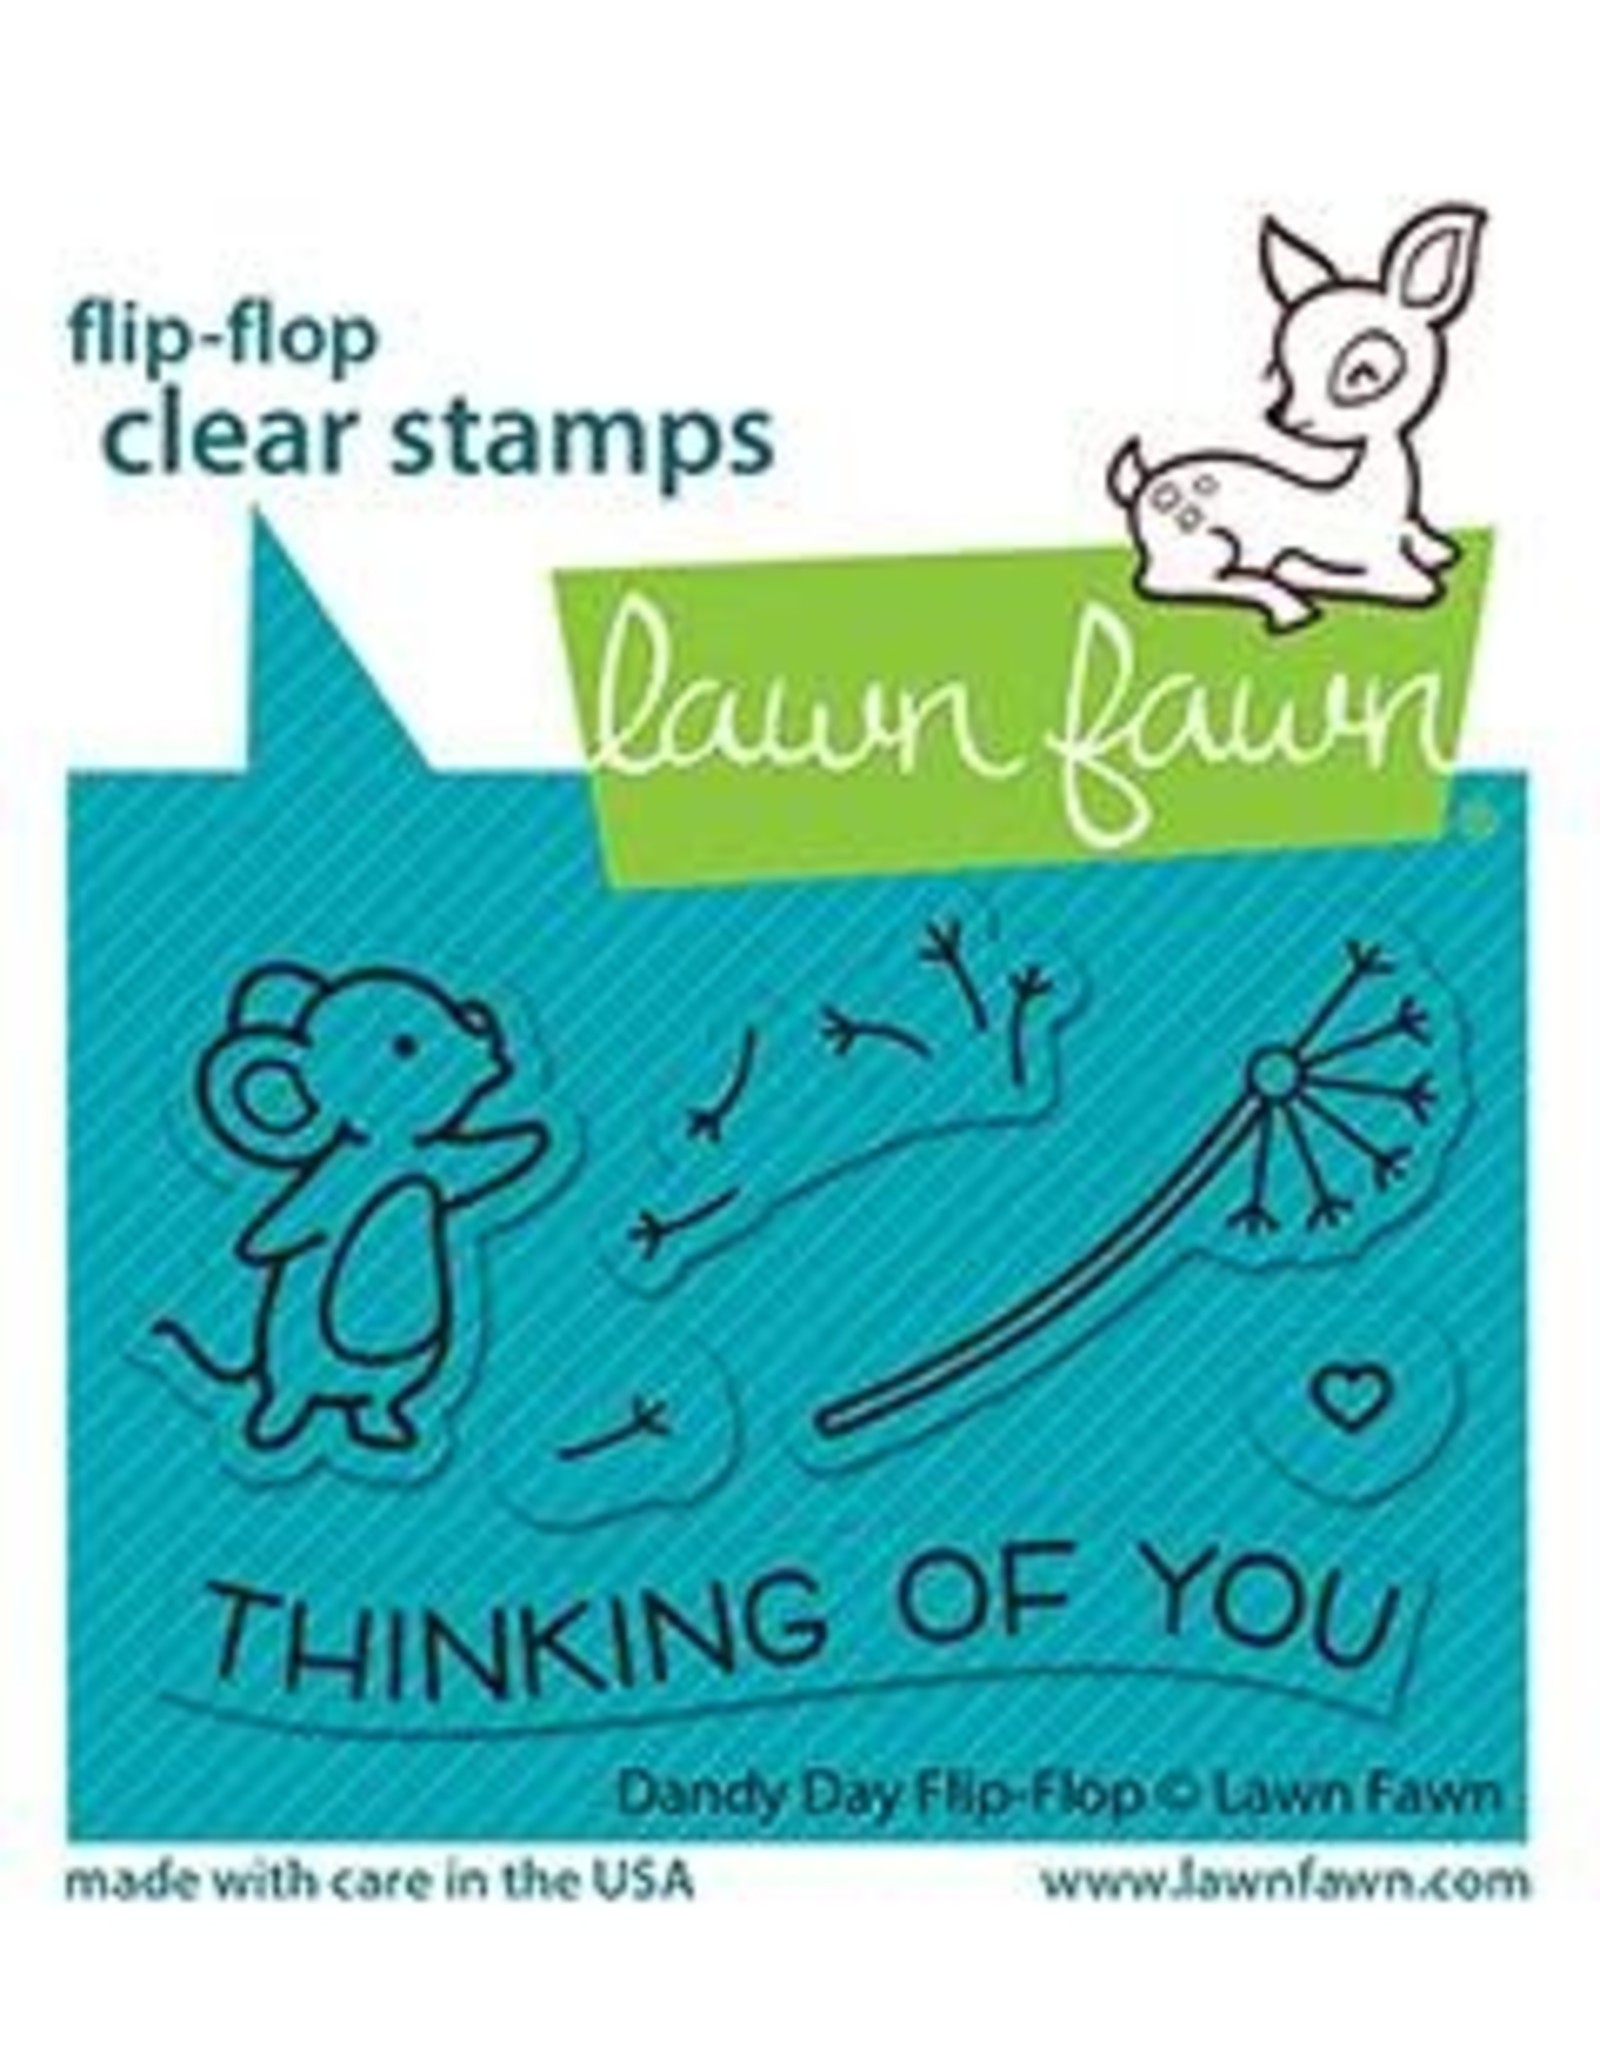 Lawn Fawn Dandy Day Flip-Flop - Clear Stamps